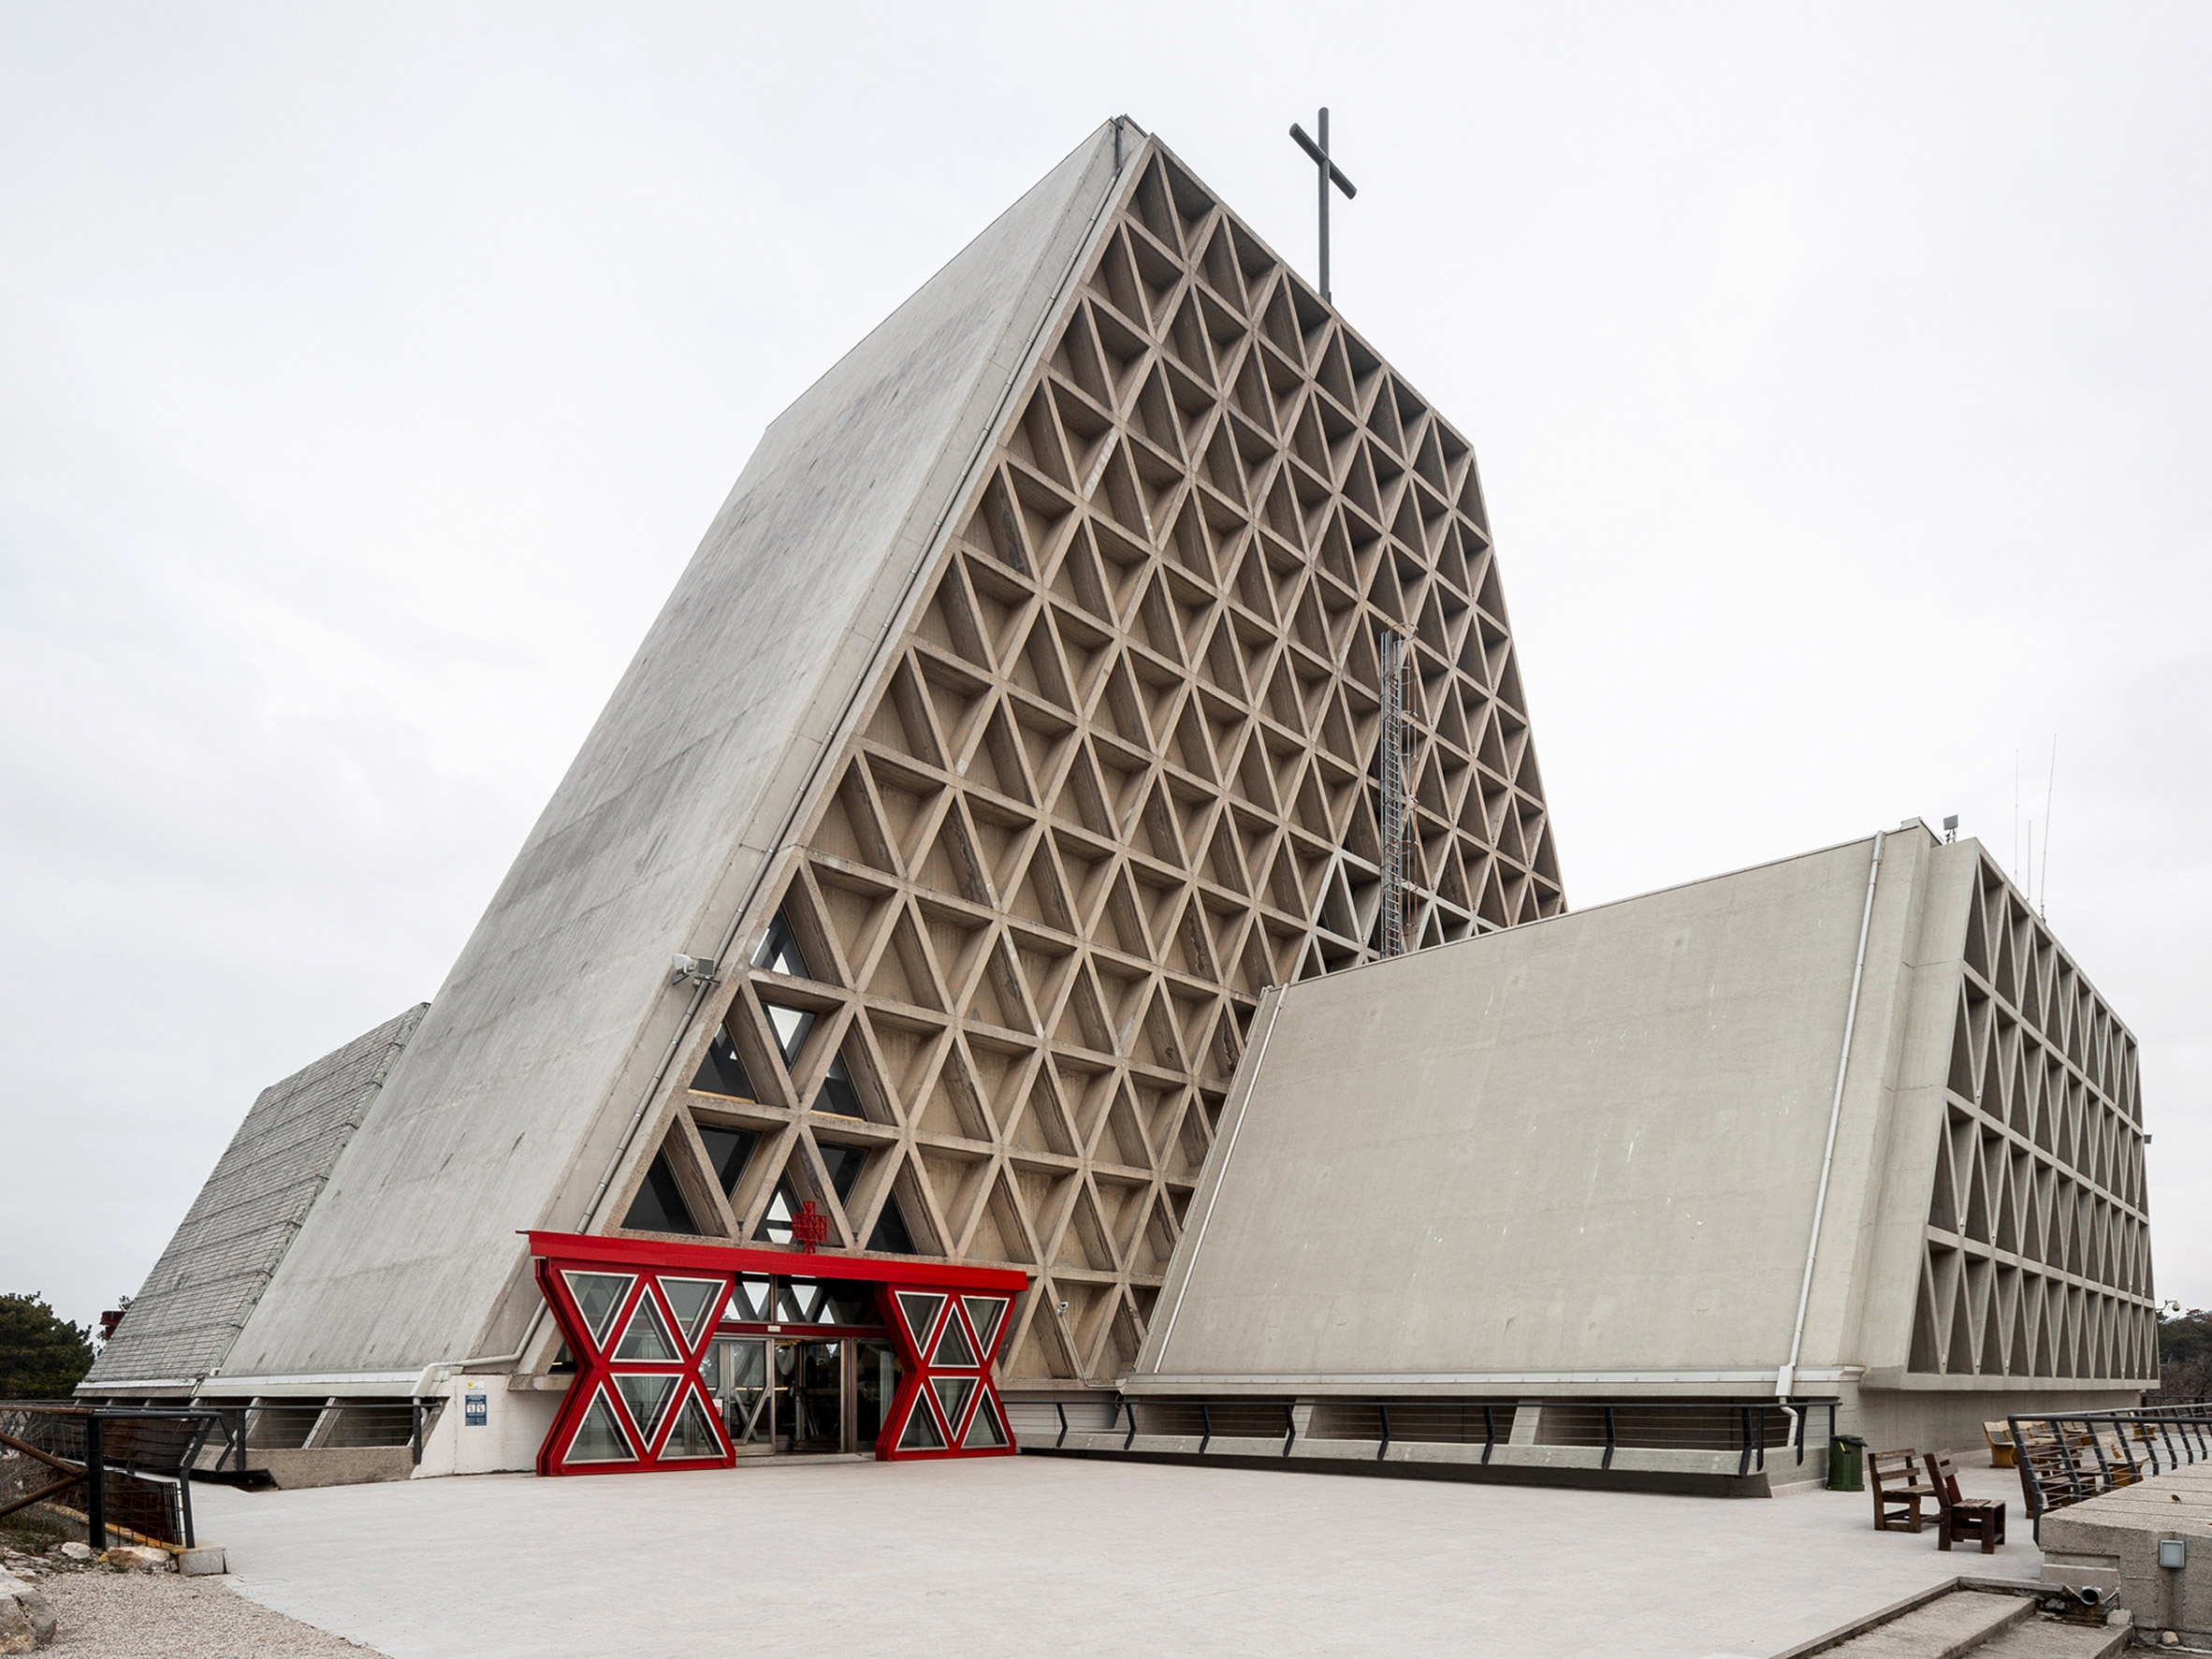 National Temple to Mary, Mother and Queen, Trieste, építészet: Antonio Guacci and Sergio Musmeci (1965), fotó: Stefano Perego